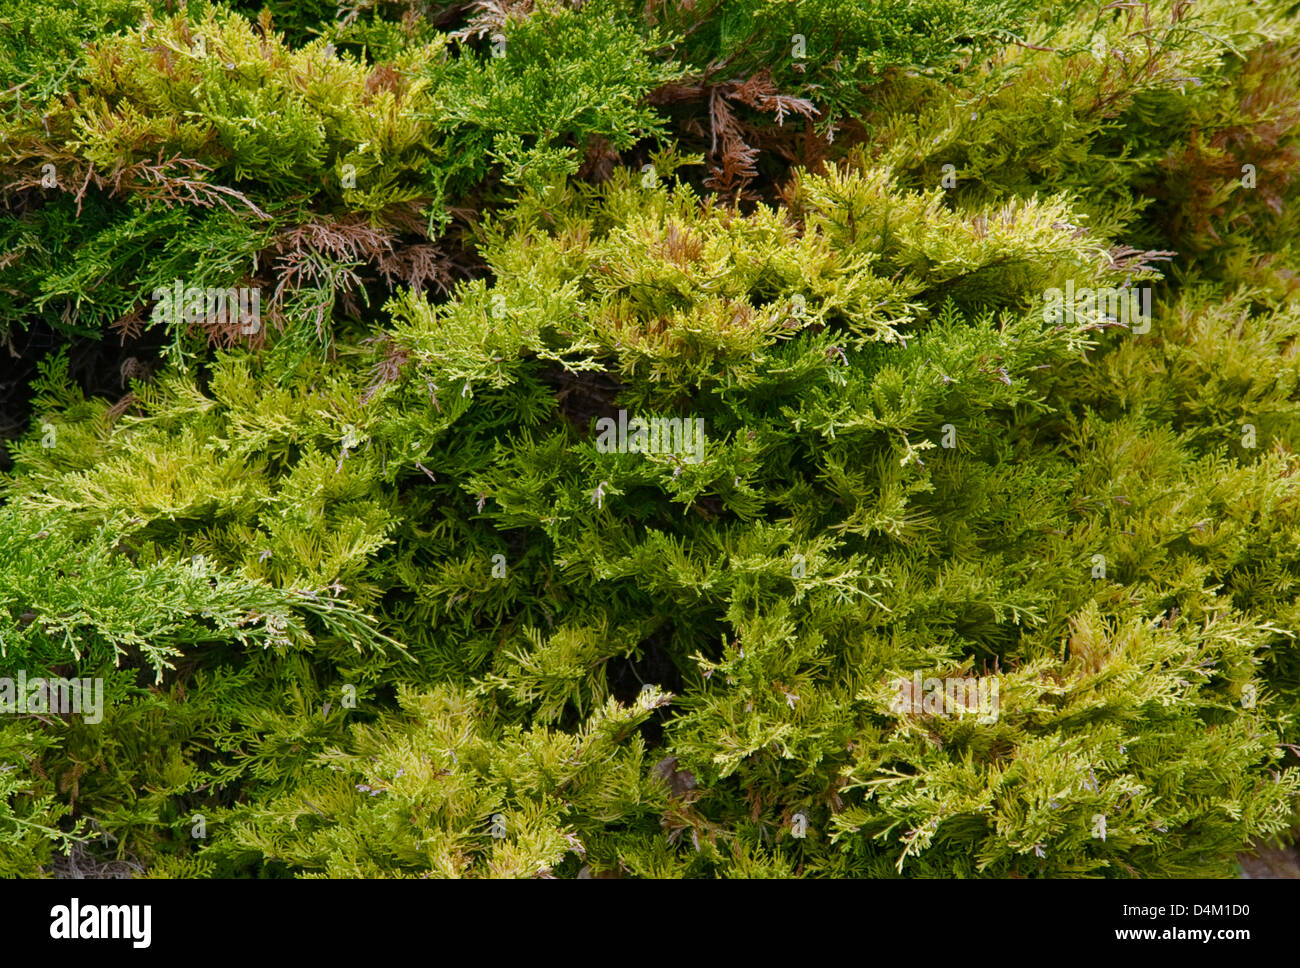 full frame natural background showing thuja leaves Stock Photo